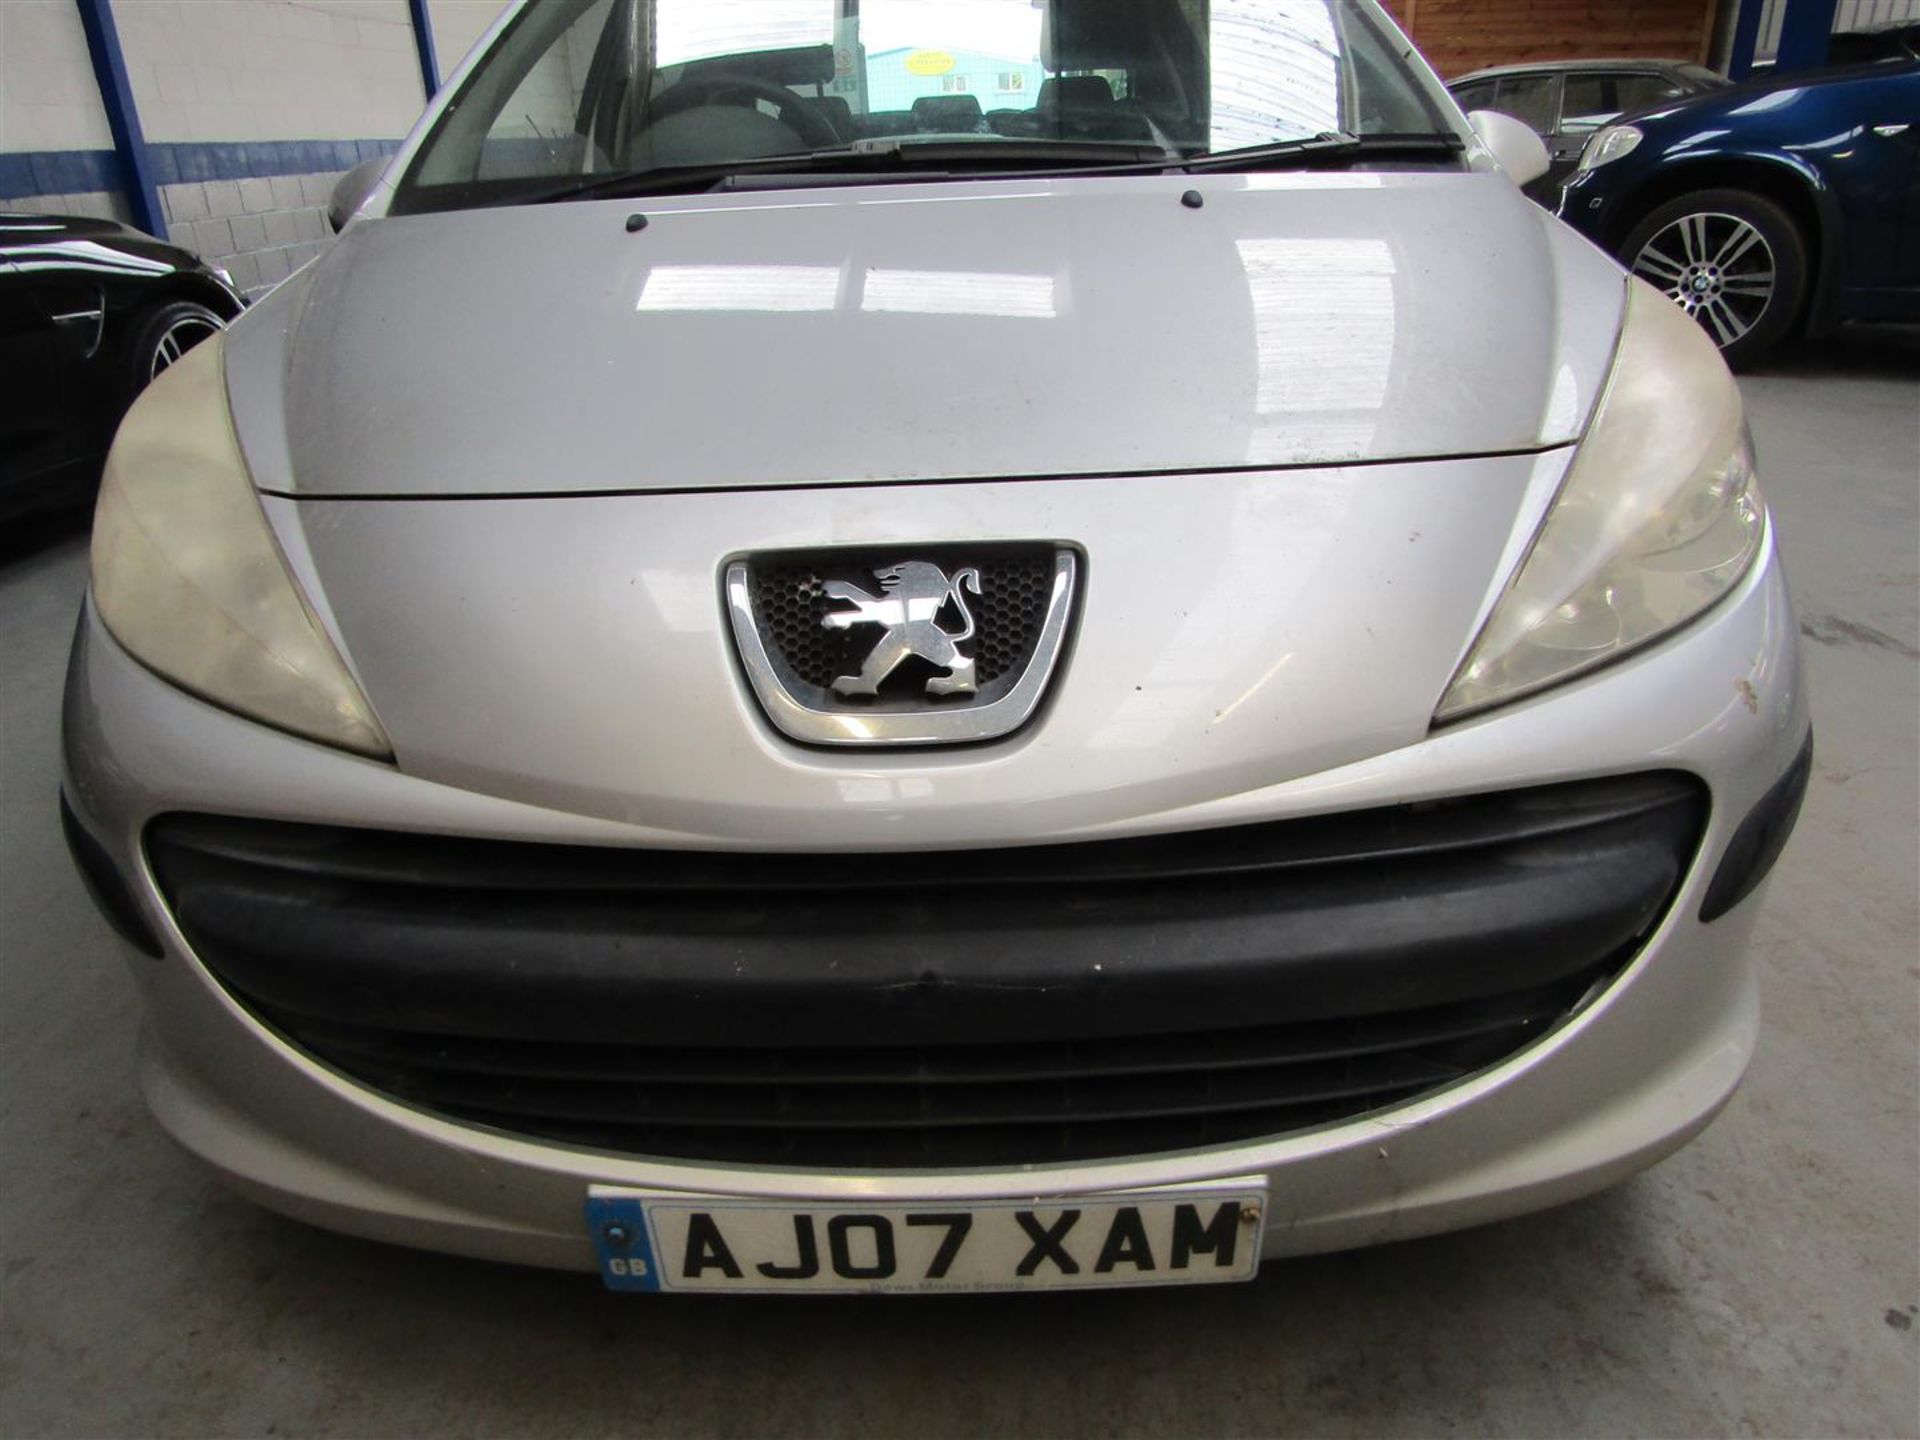 07 07 Peugeot 207 S - Image 7 of 16